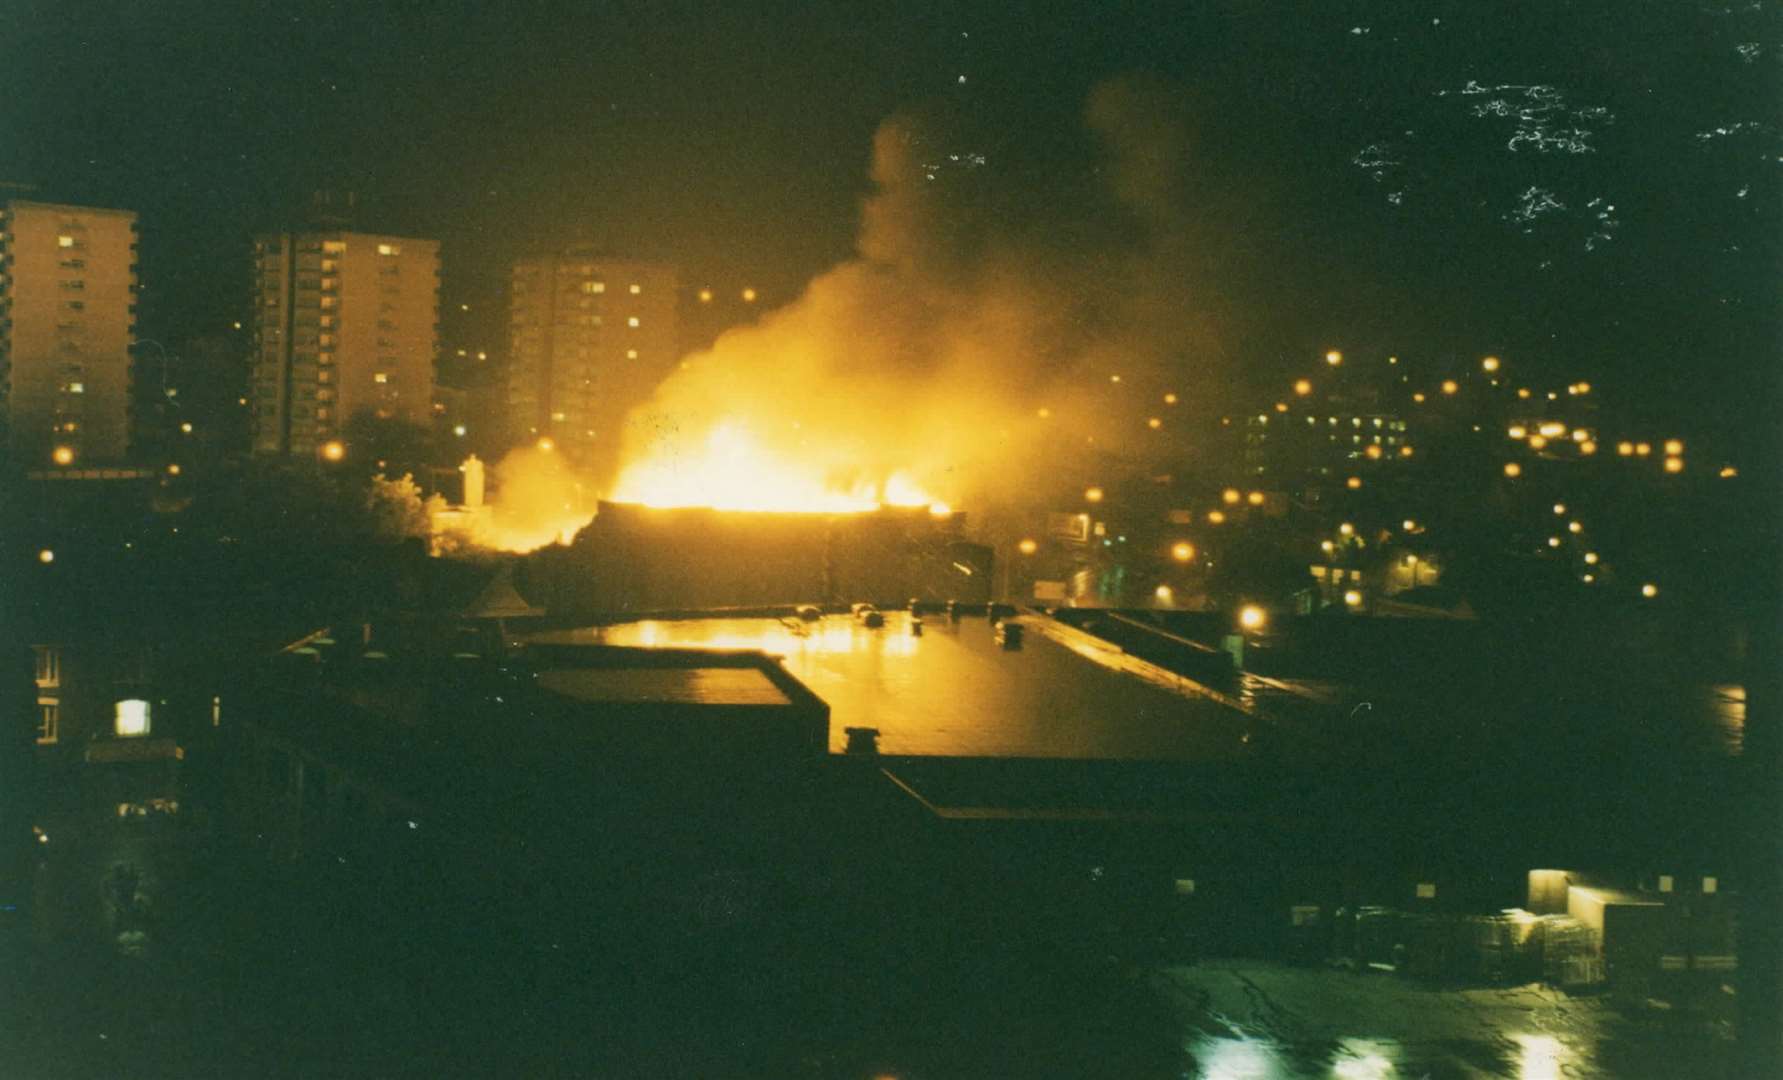 Fire ripped through the old Gala bingo building in Chatham High Street on September 30, 1998